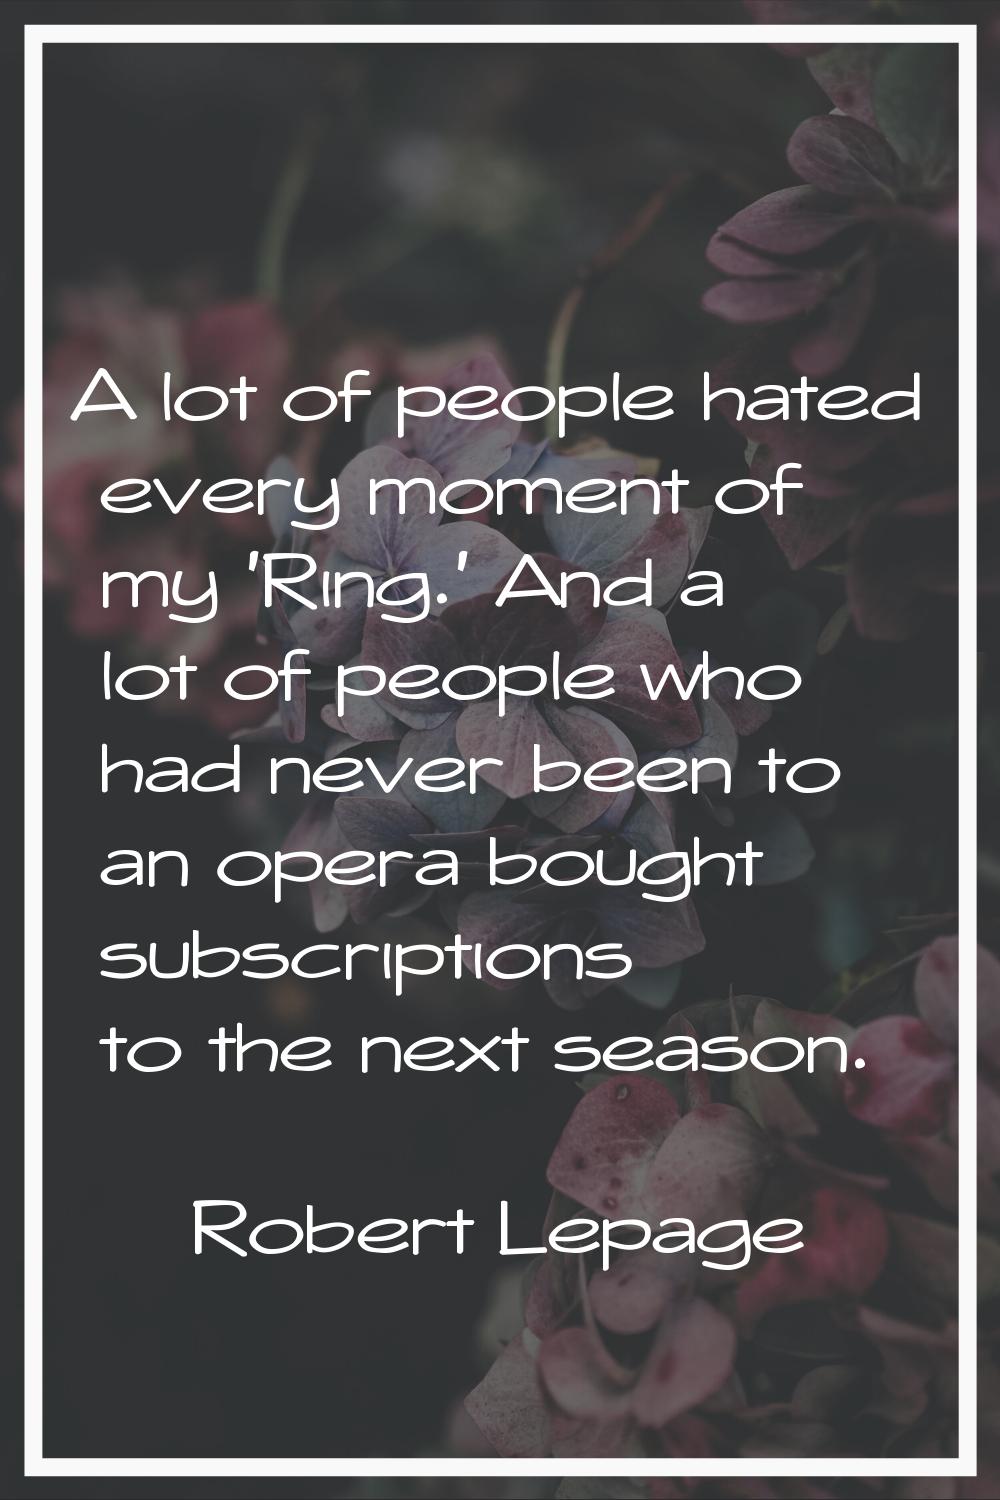 A lot of people hated every moment of my 'Ring.' And a lot of people who had never been to an opera